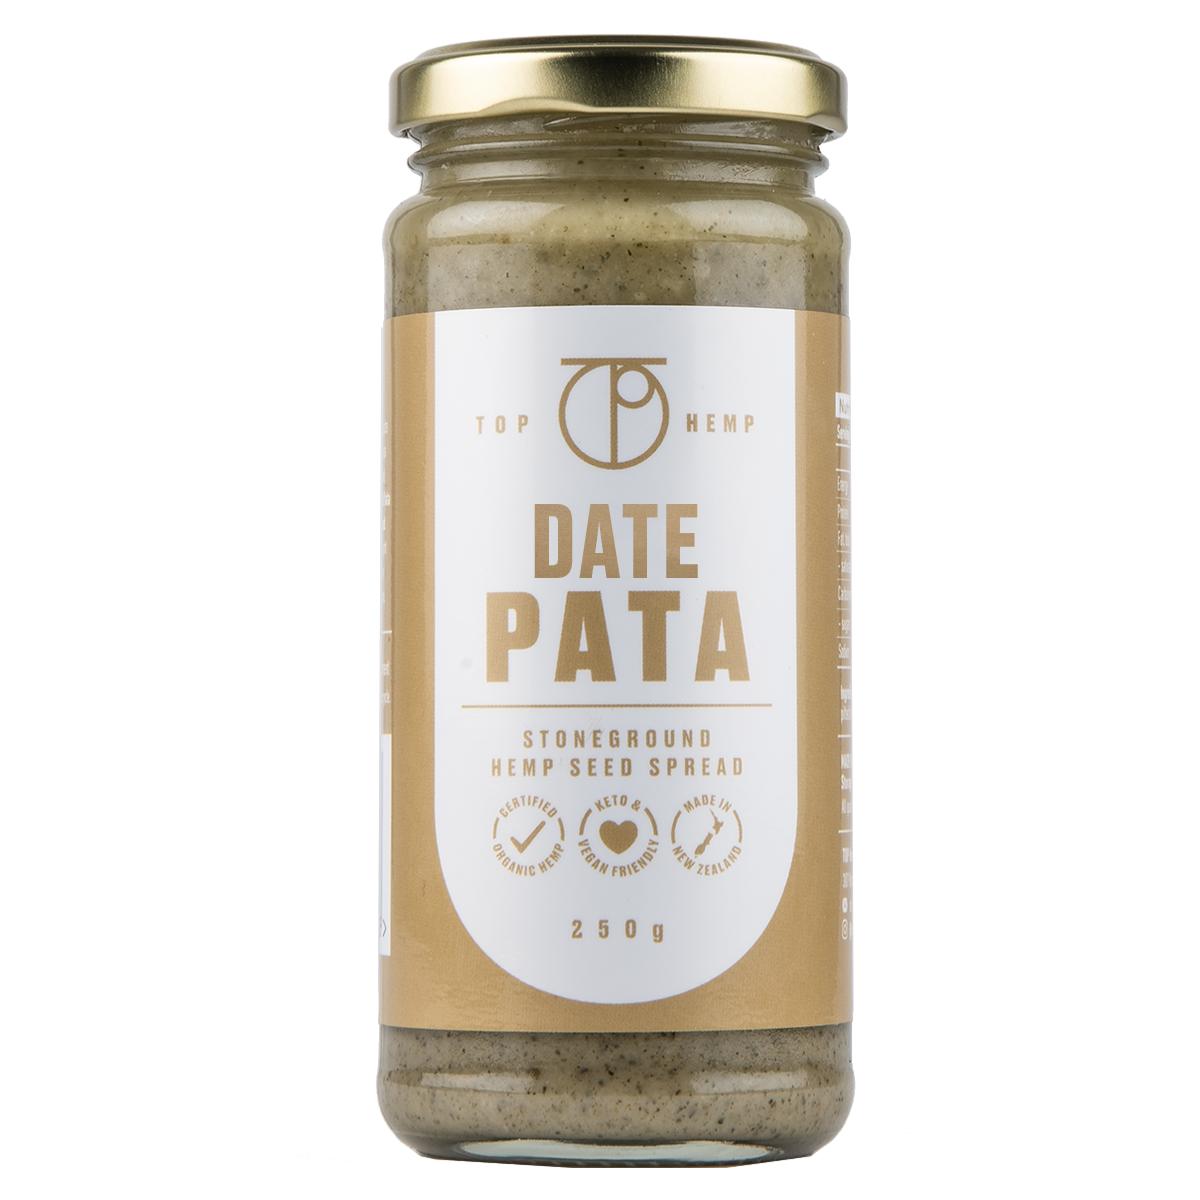 product image for TOP Hemp - Date Pata (stoneground hemp seed spread)